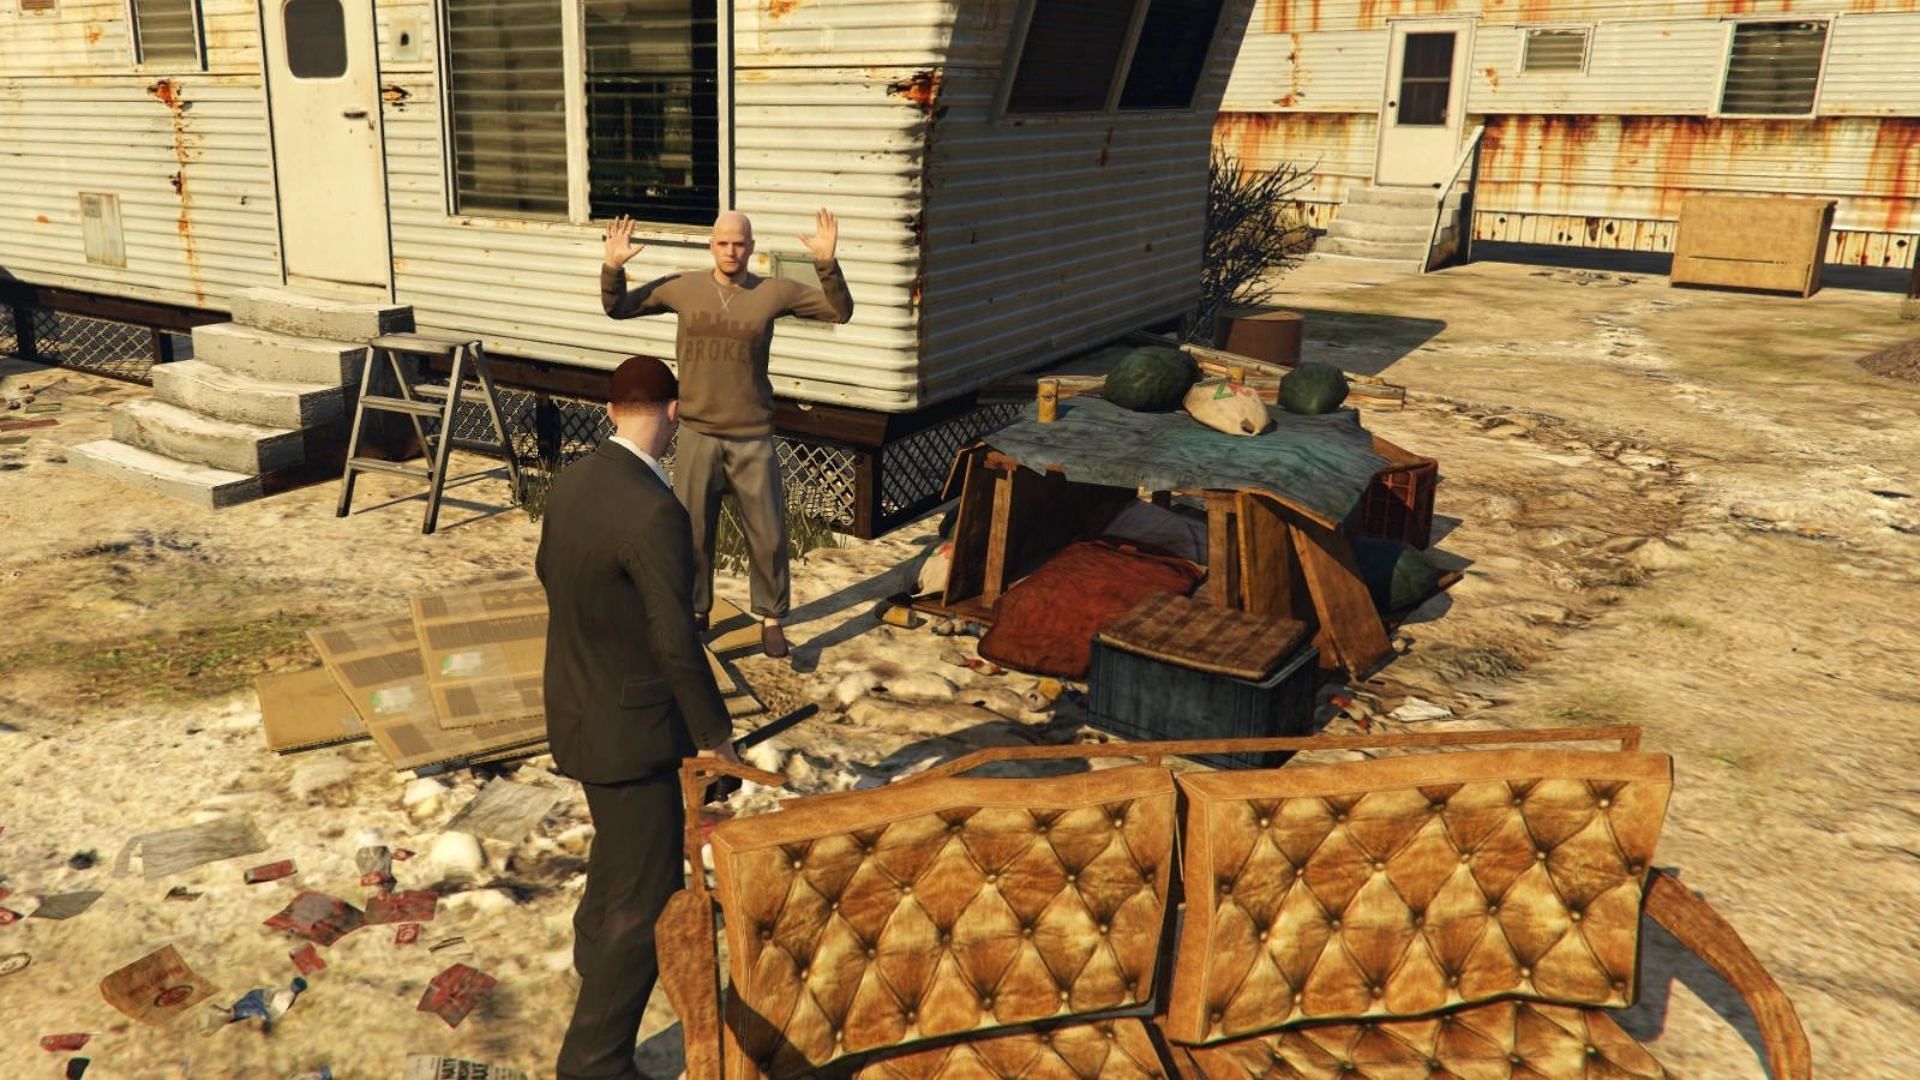 The targets can be at any one of the locations (Image via Rockstar Games)